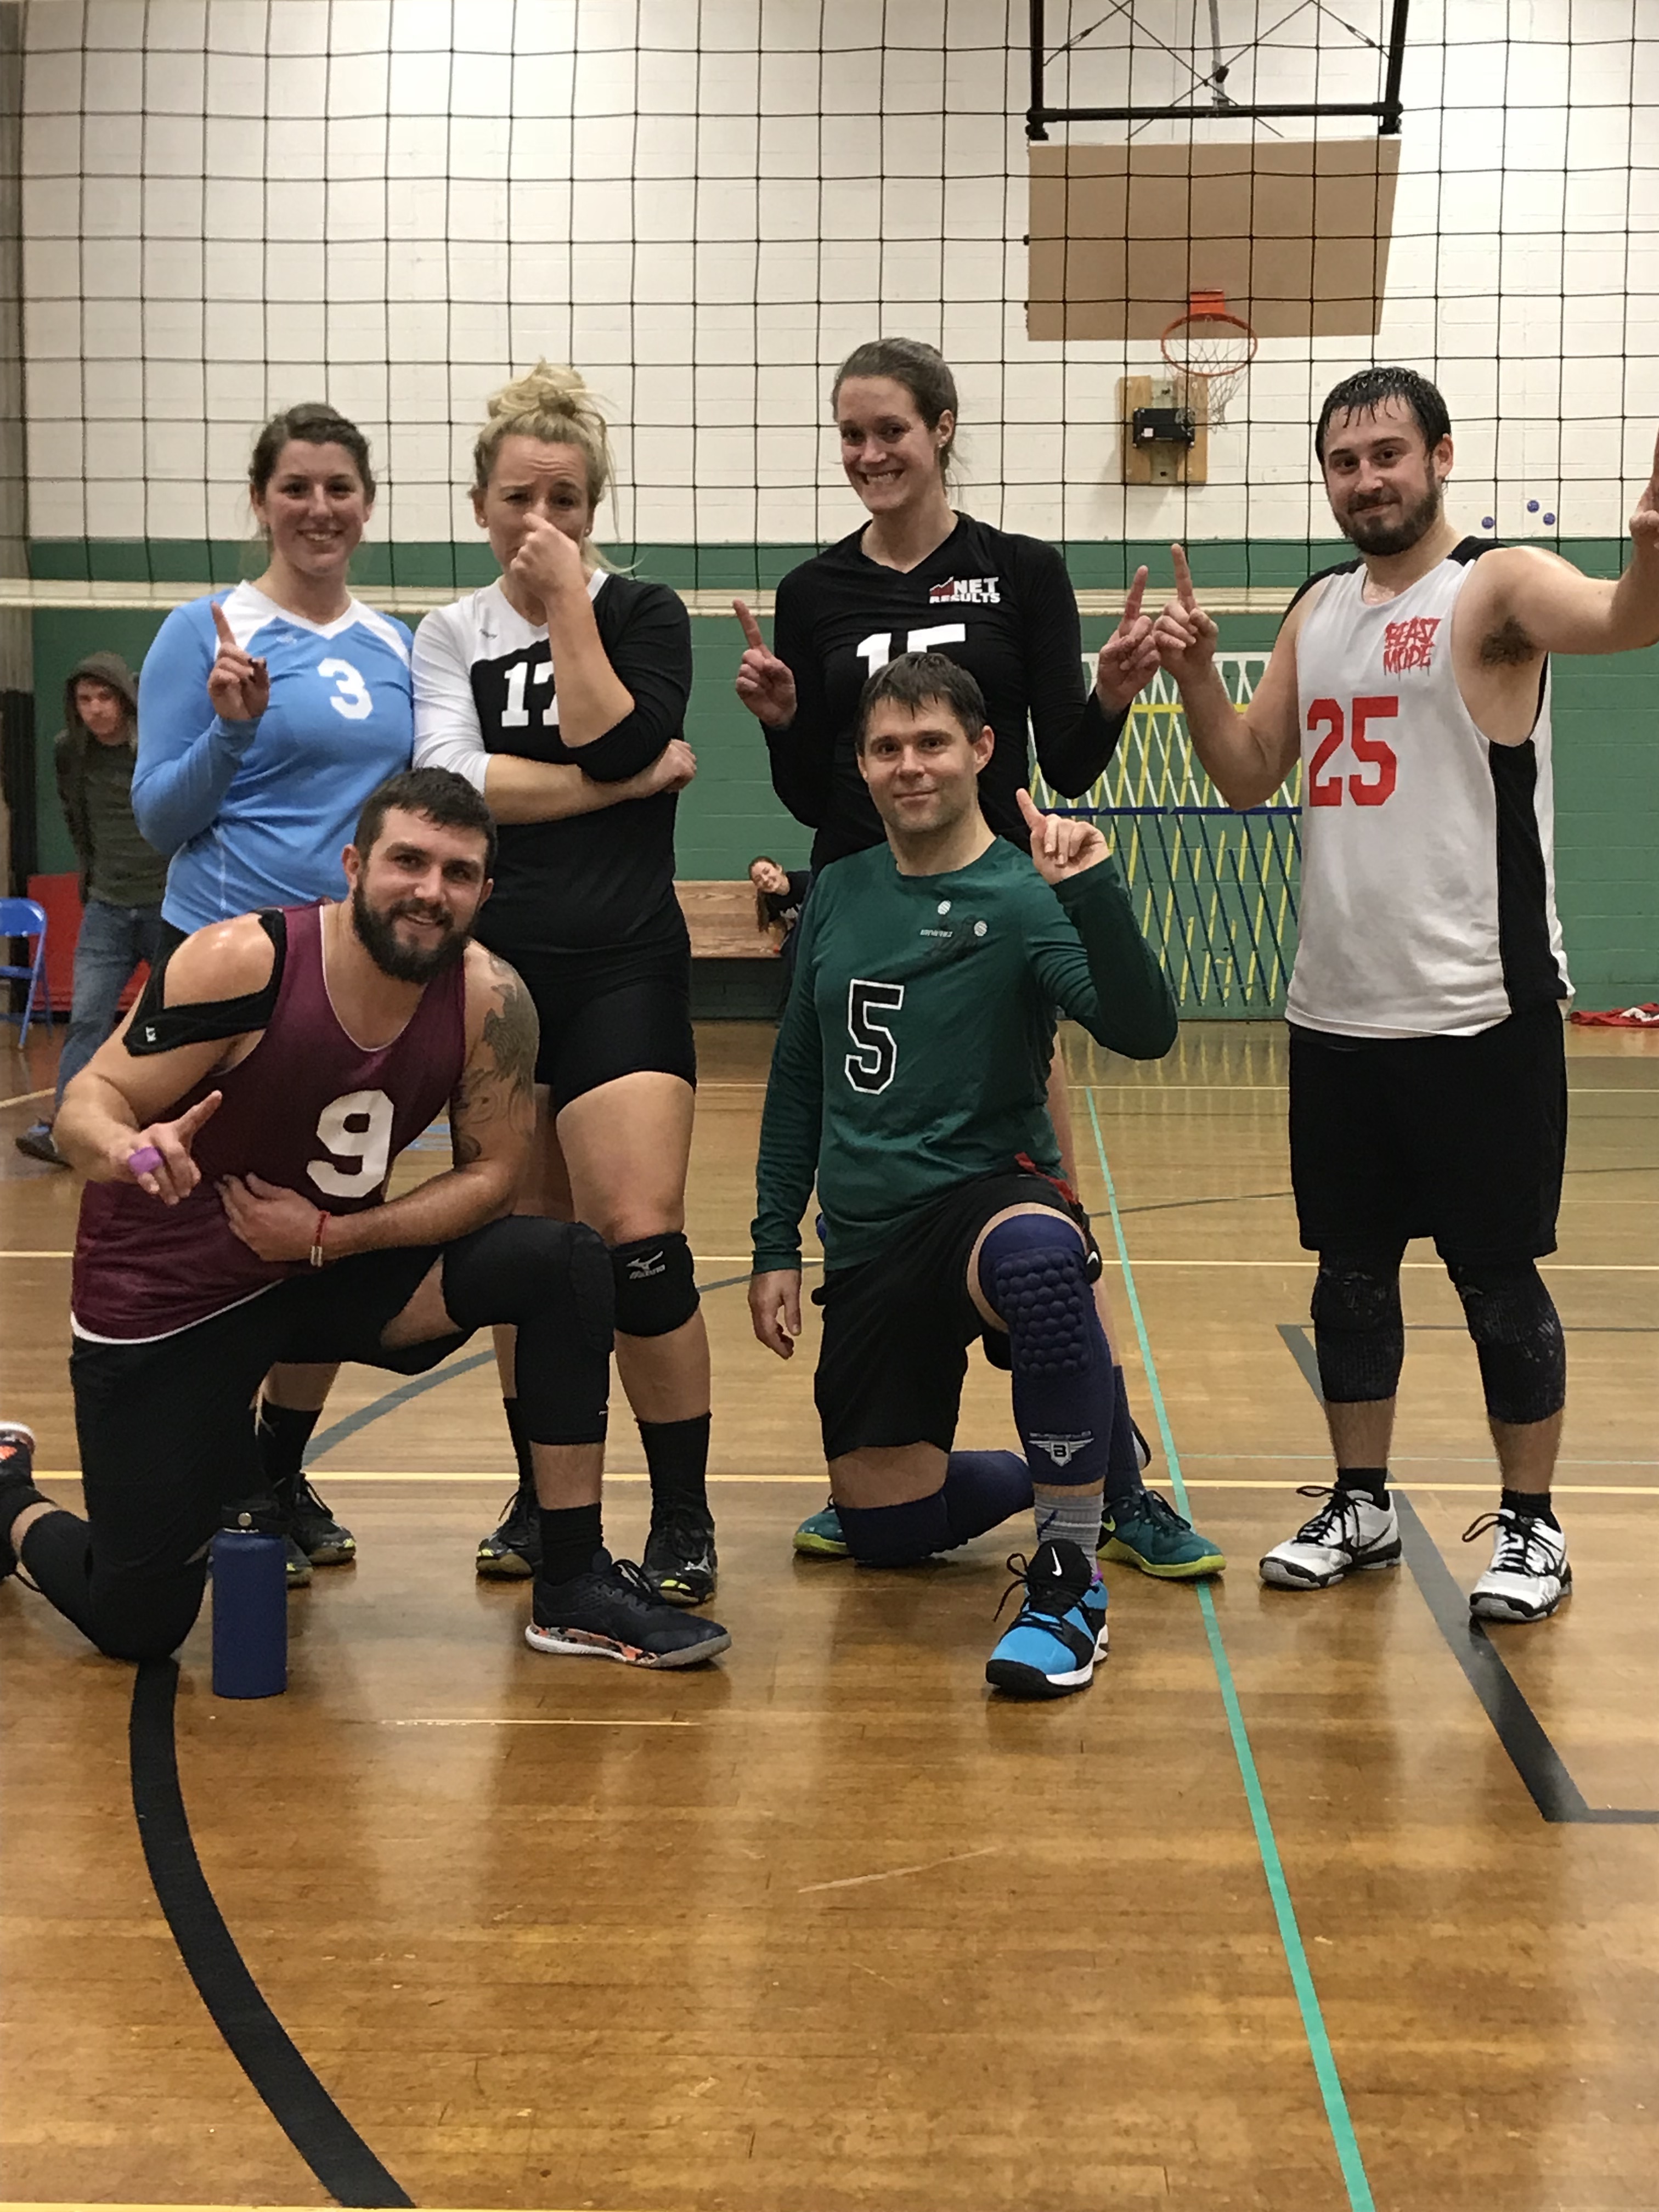 Turkey Day Leftovers held off the Savages to win the CR C+ 